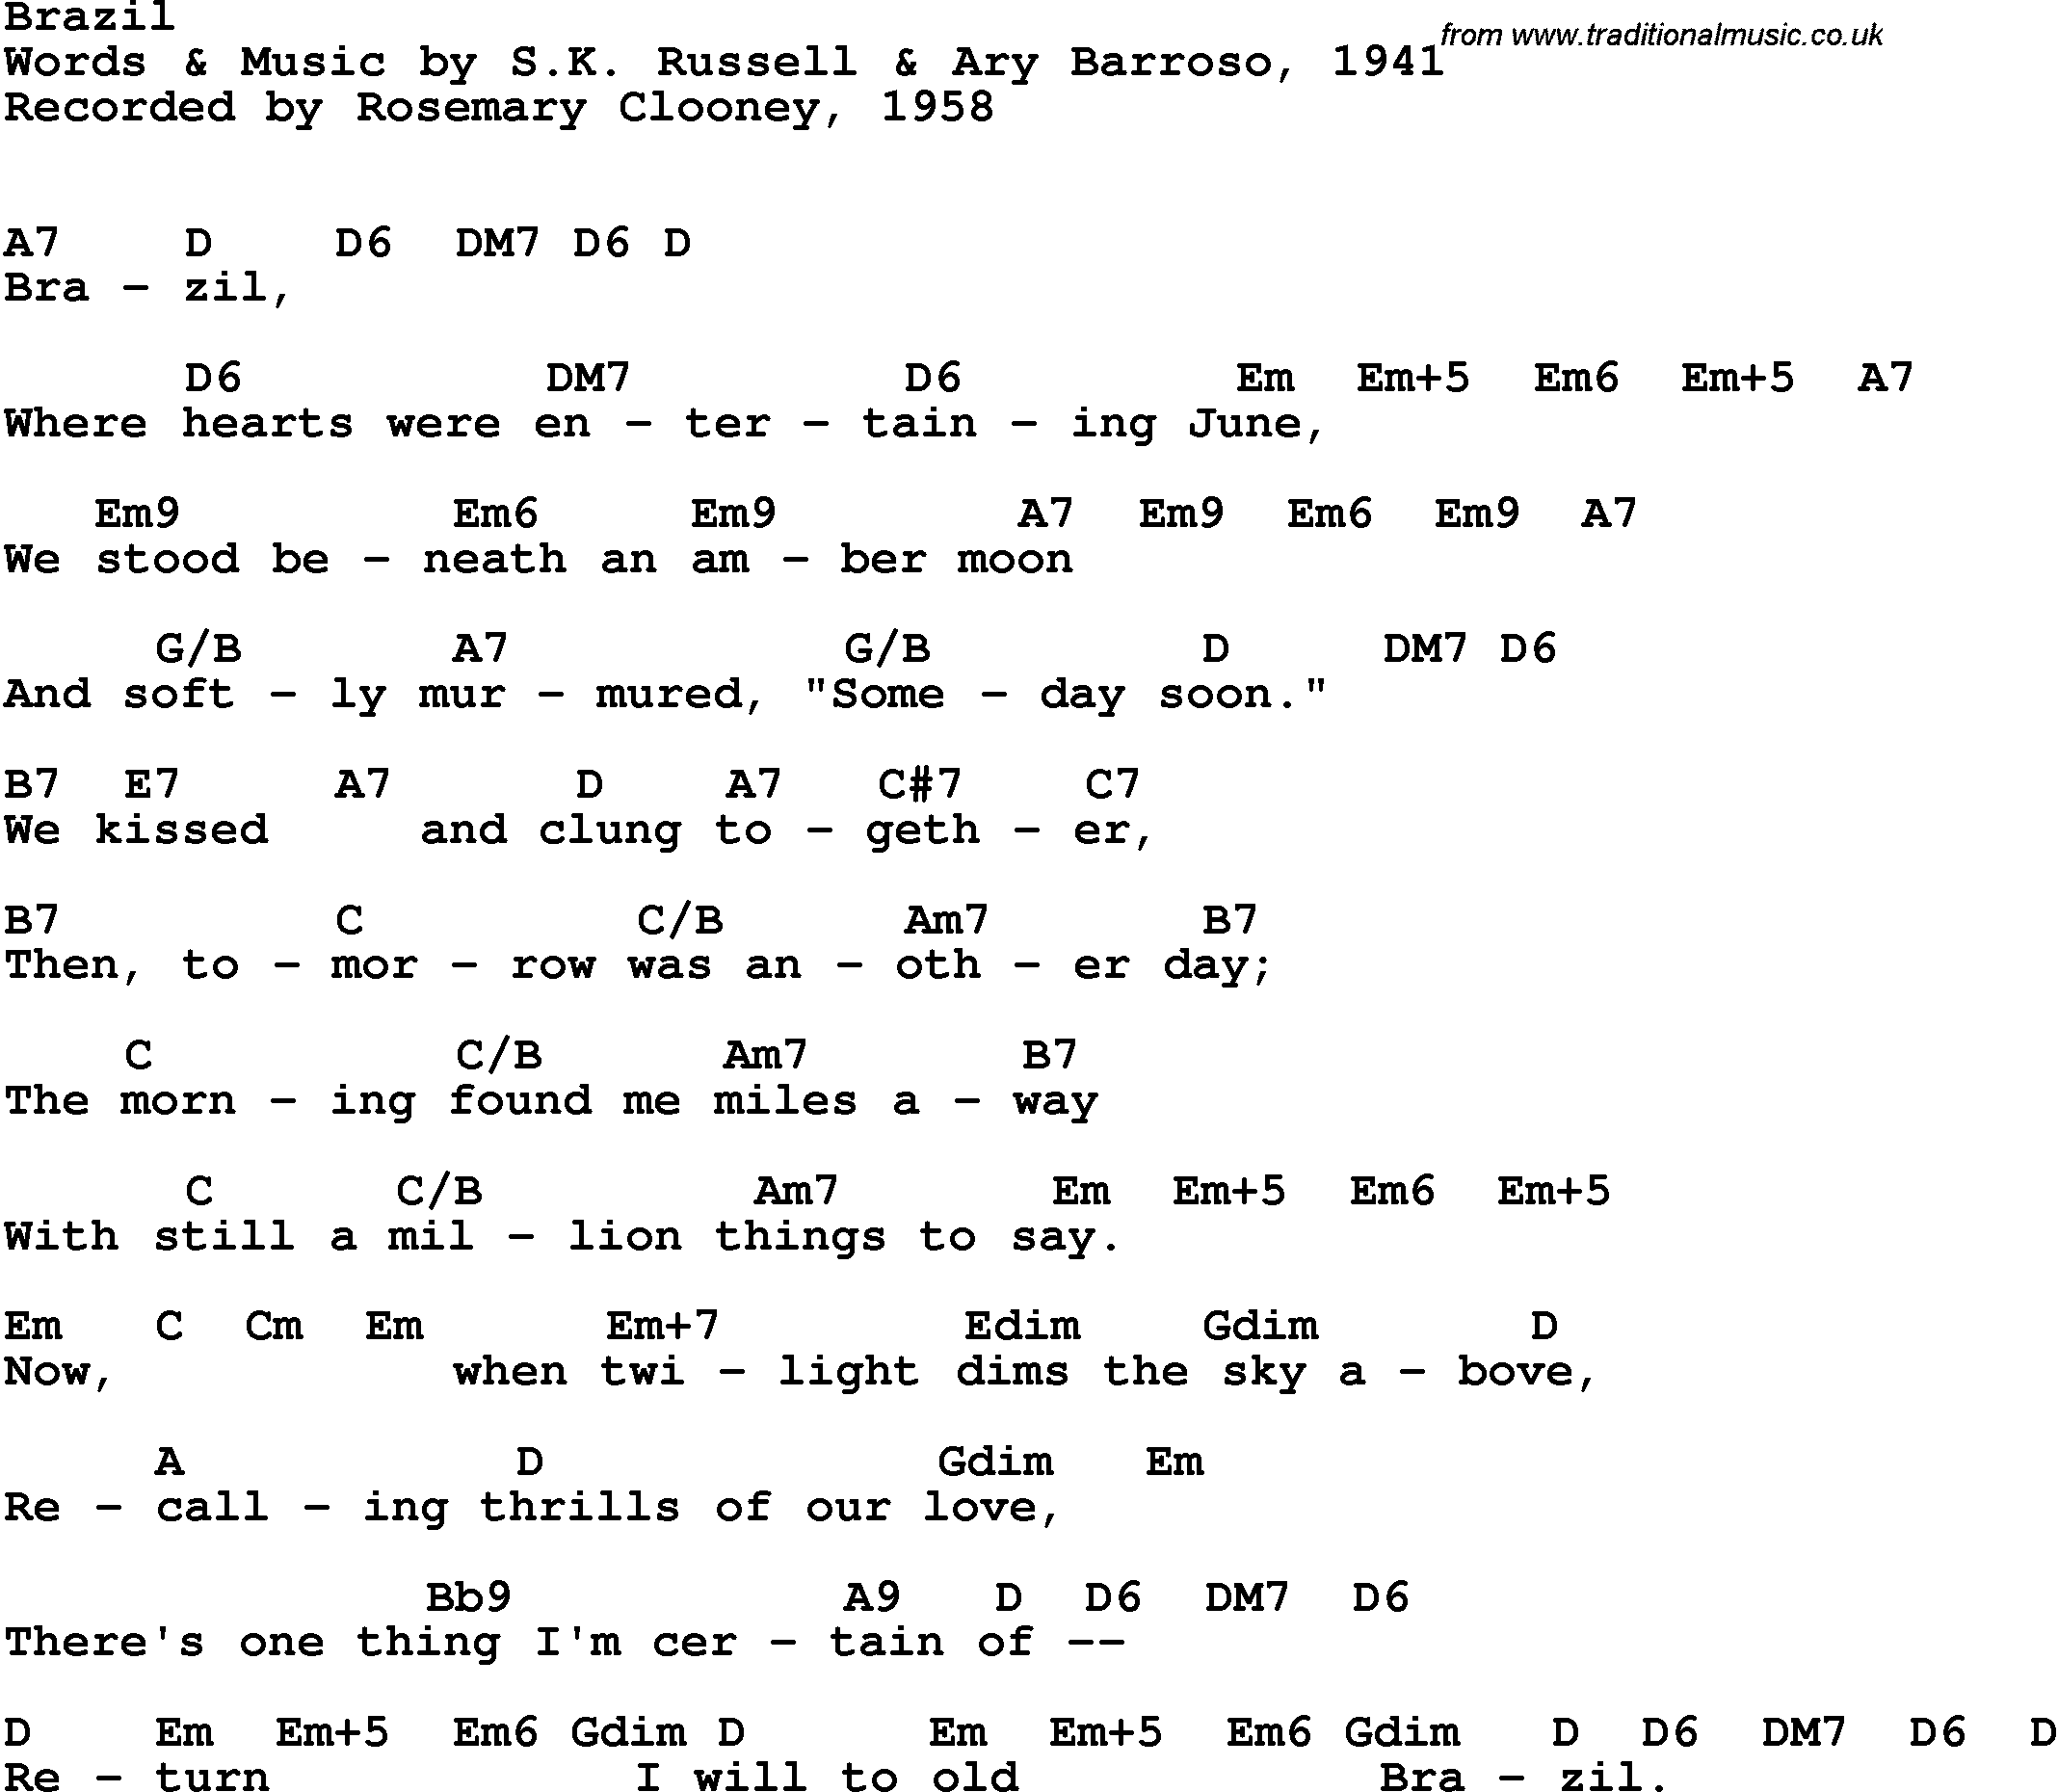 Song Lyrics with guitar chords for Brazil - Rosemary Clooney, 1958